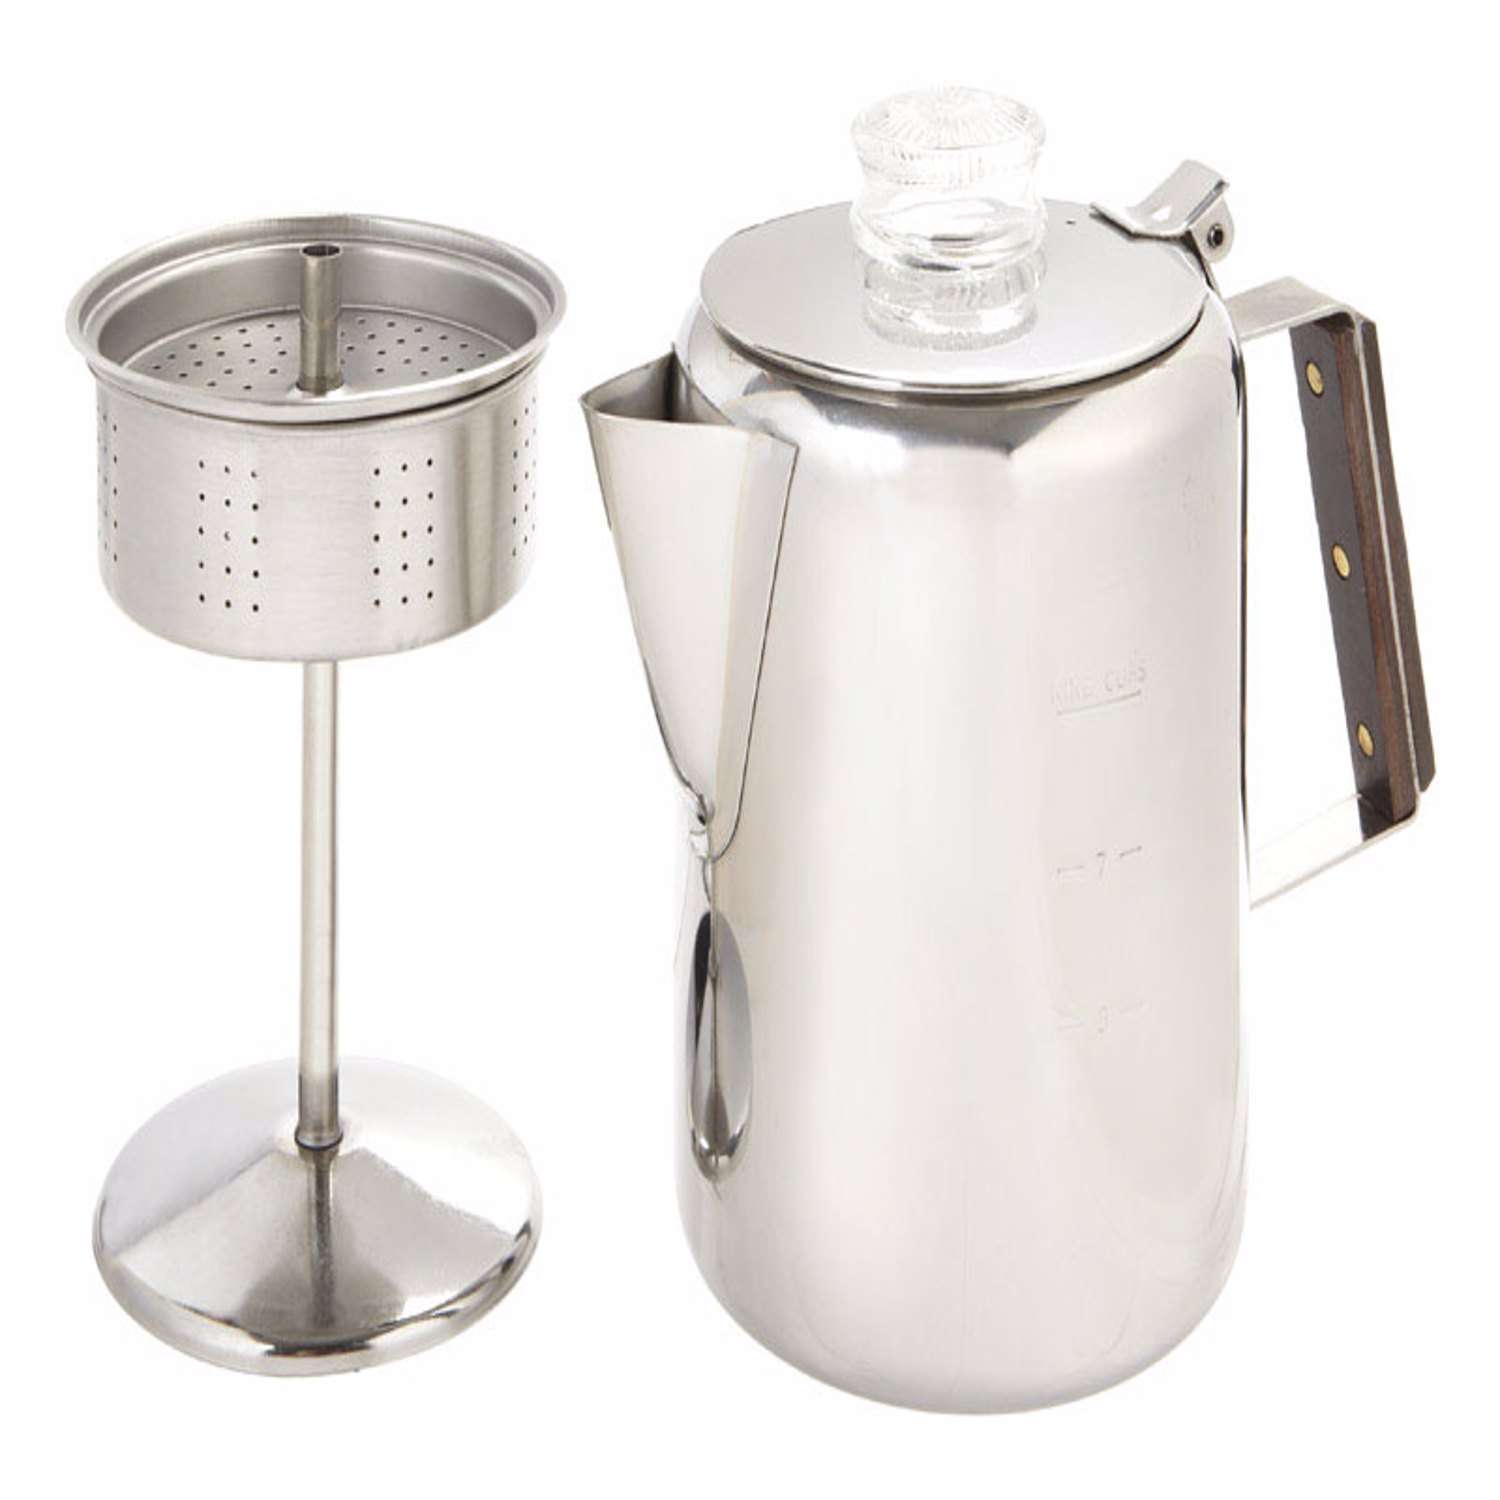 Tops Rapid Brew 9 cups Silver Stovetop Percolator - Ace Hardware